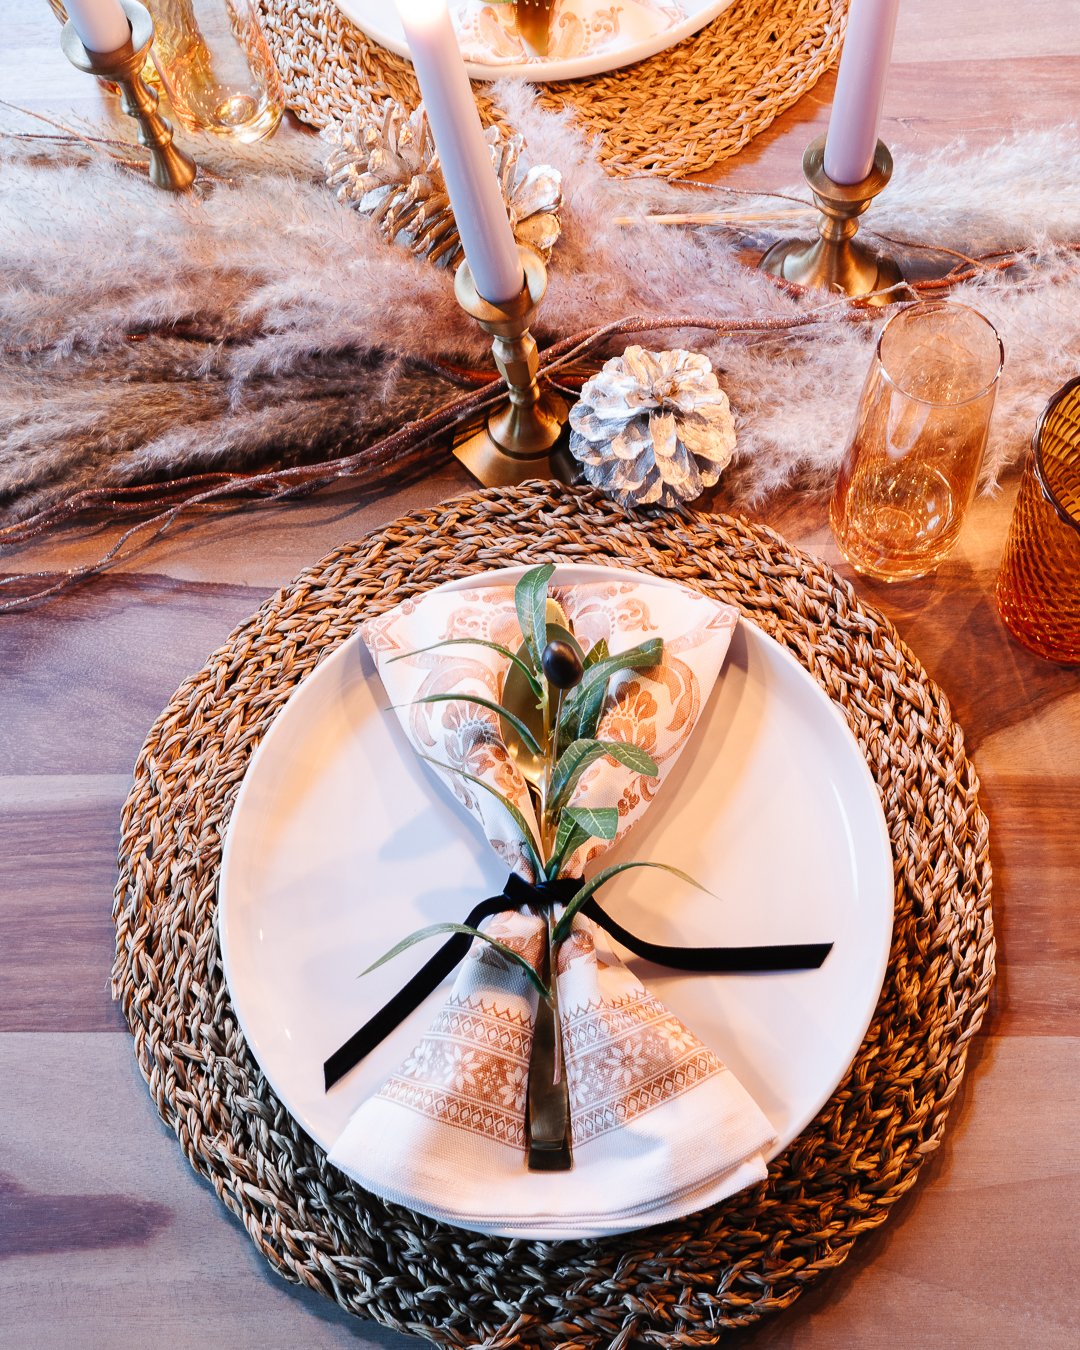 3 EASY AND ELEGANT NEW YEAR'S PARTY DECOR IDEAS FROM BINDLE & BRASS —  Bindle & Brass Trading Company